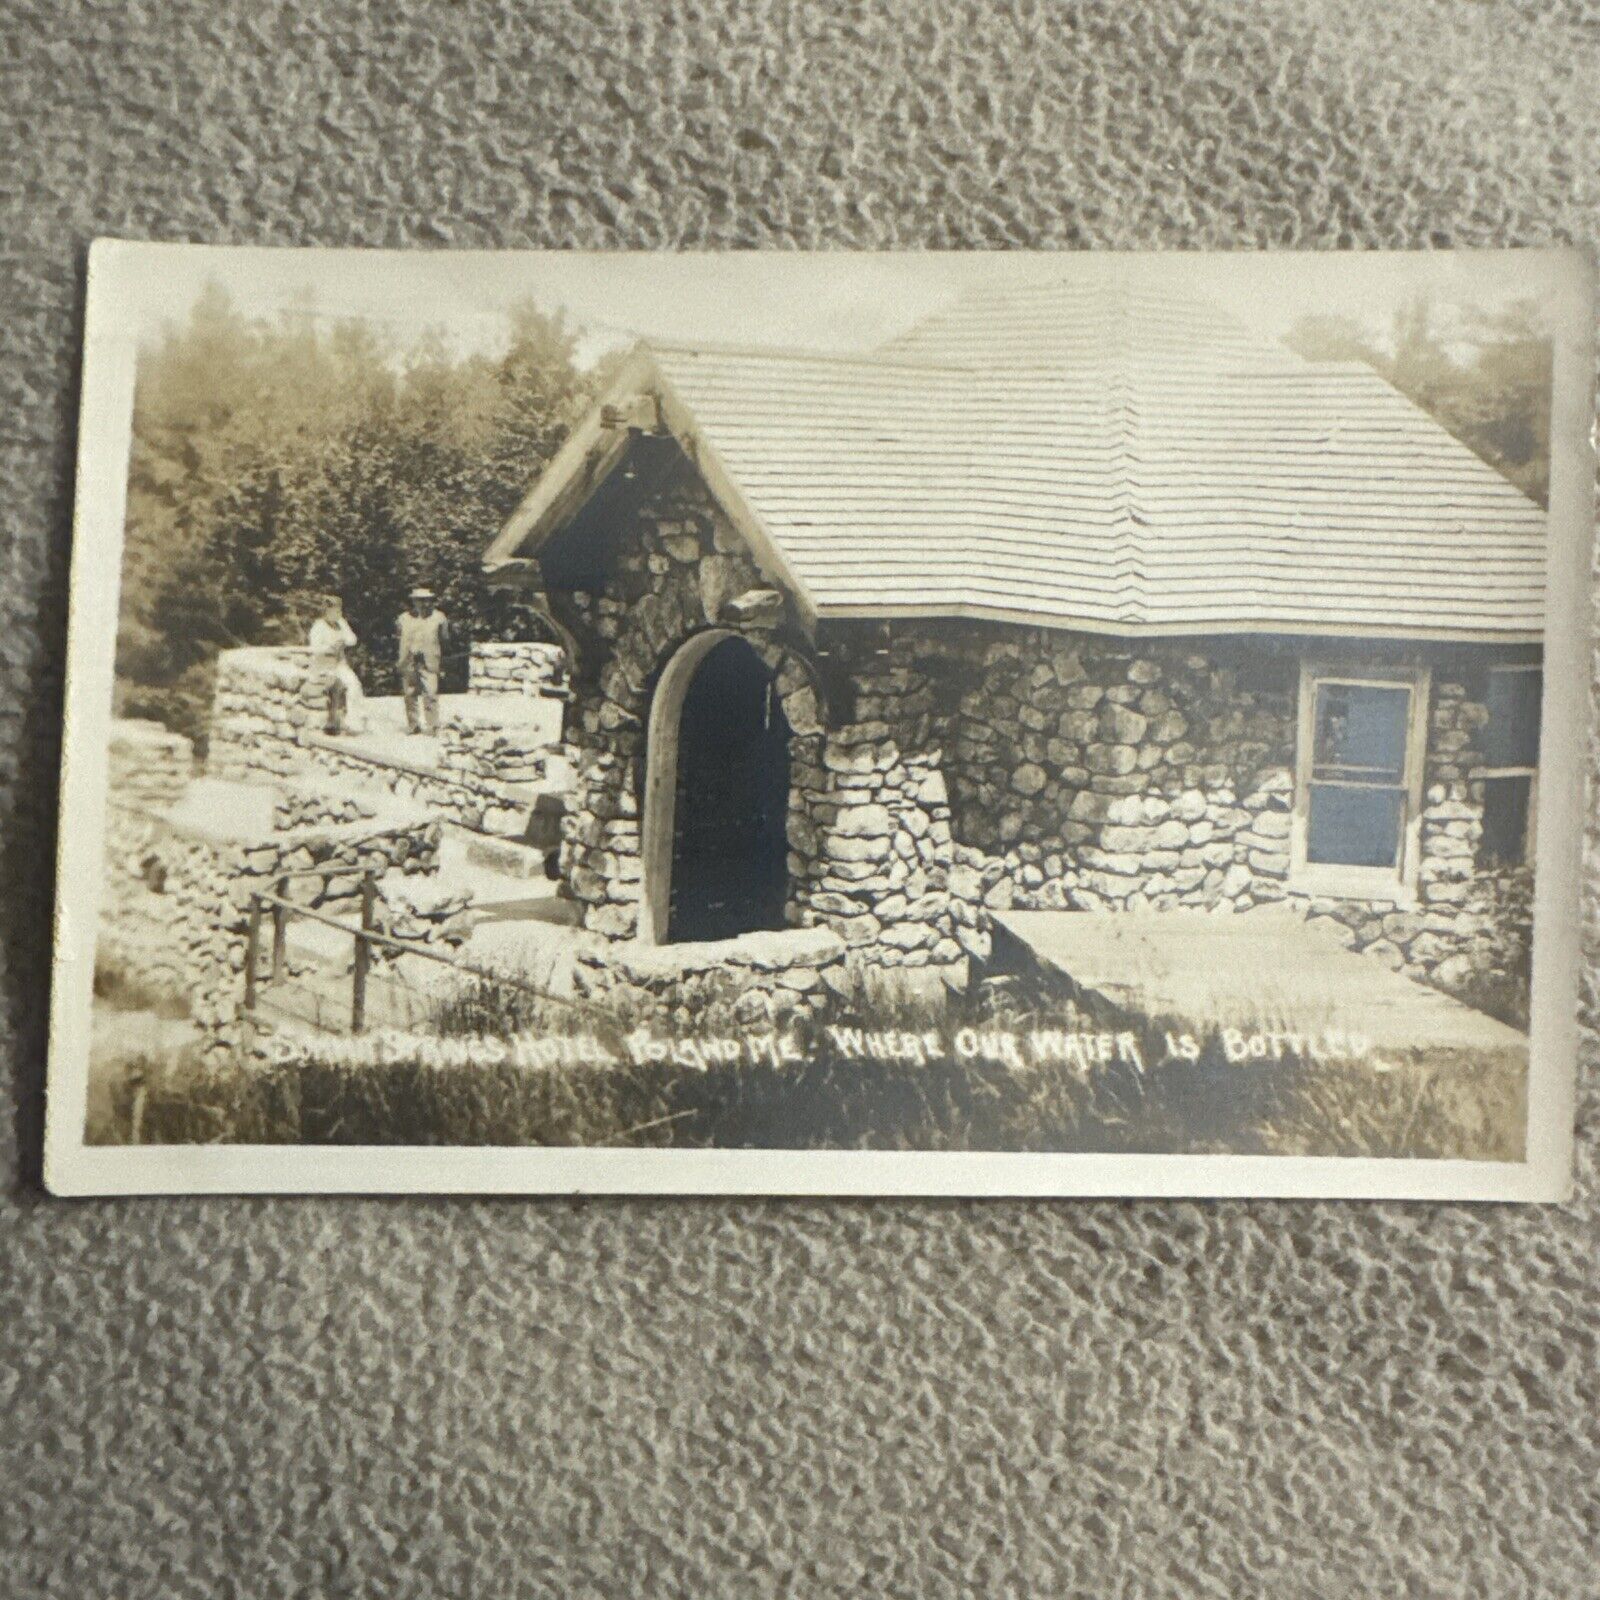 Summit Springs Hotel Poland, ME Where Our Water Is Bottled Vintage RPPC